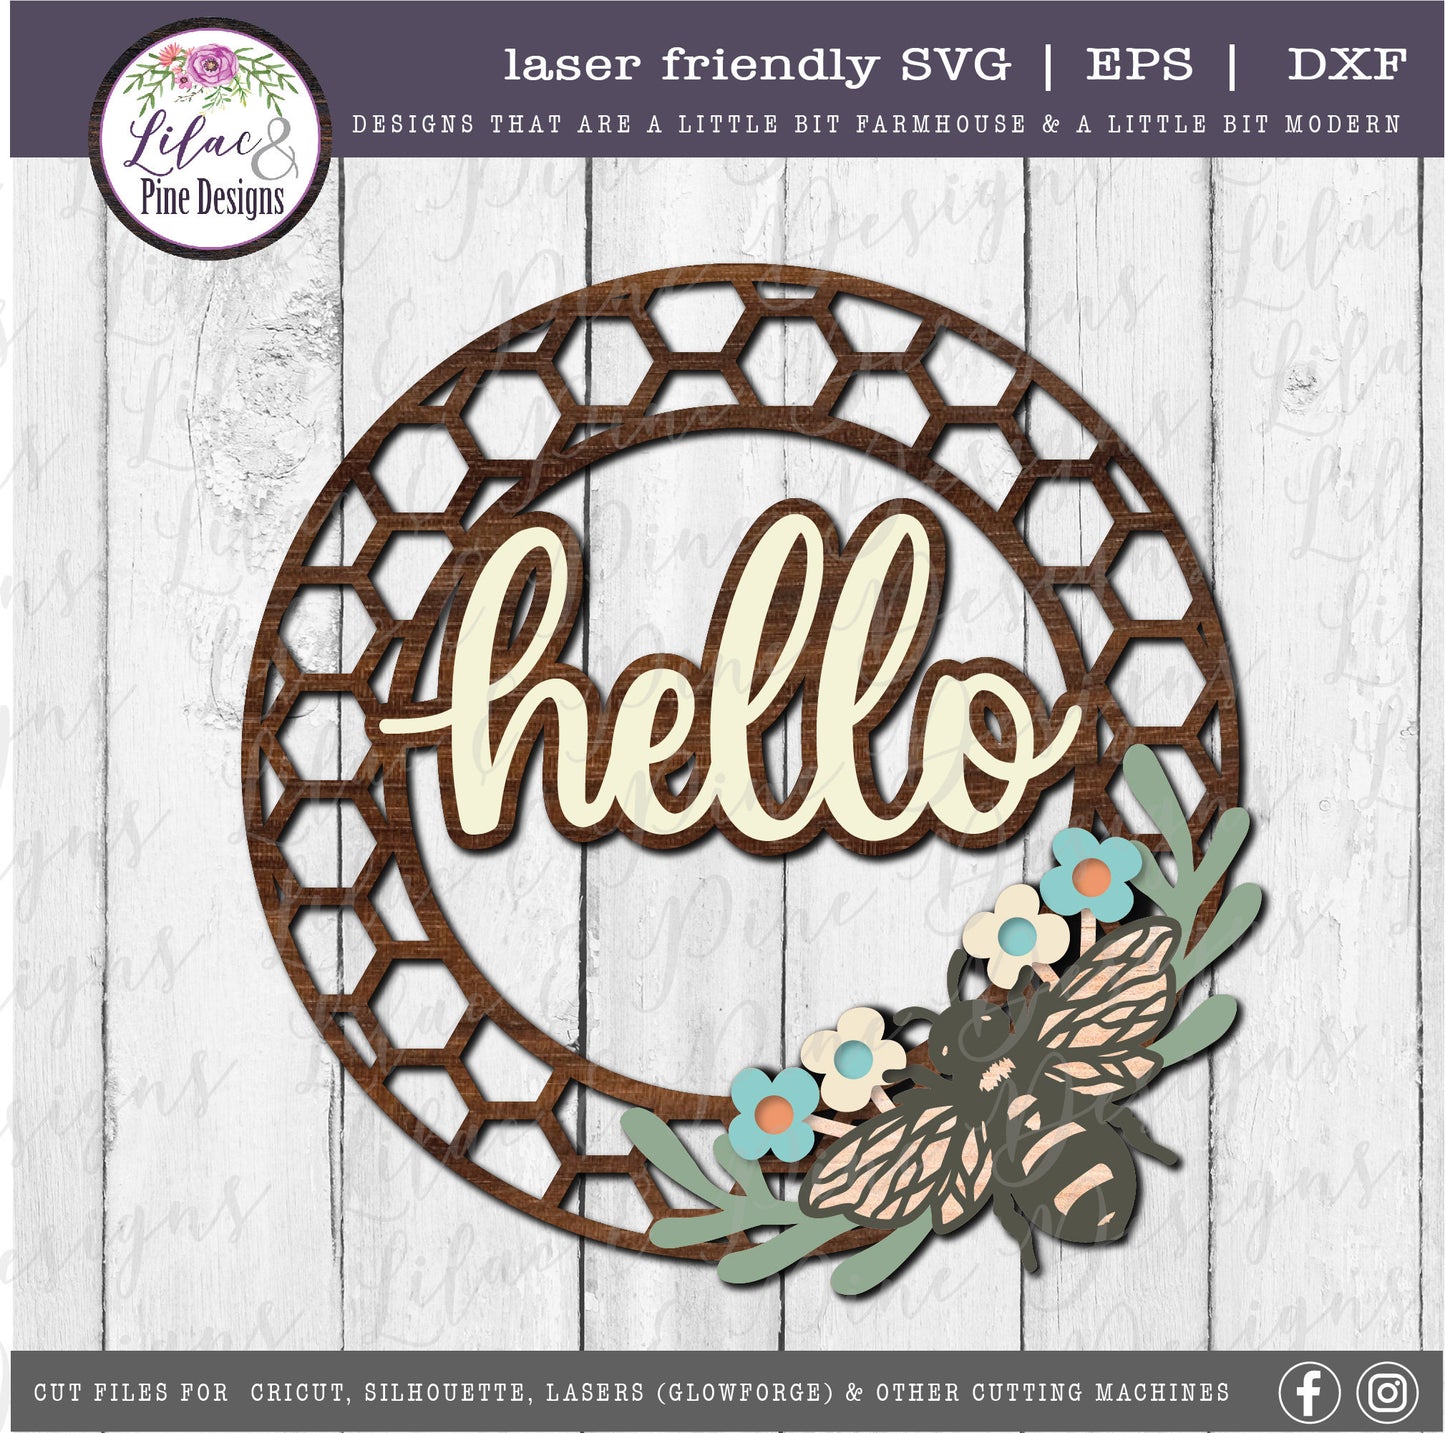 Hello Bee Honeycomb sign, Spring sign SVG, bee SVG, summer decor, honeycomb sign, honey svg, farmhouse decor, Glowforge Svg, laser cut file